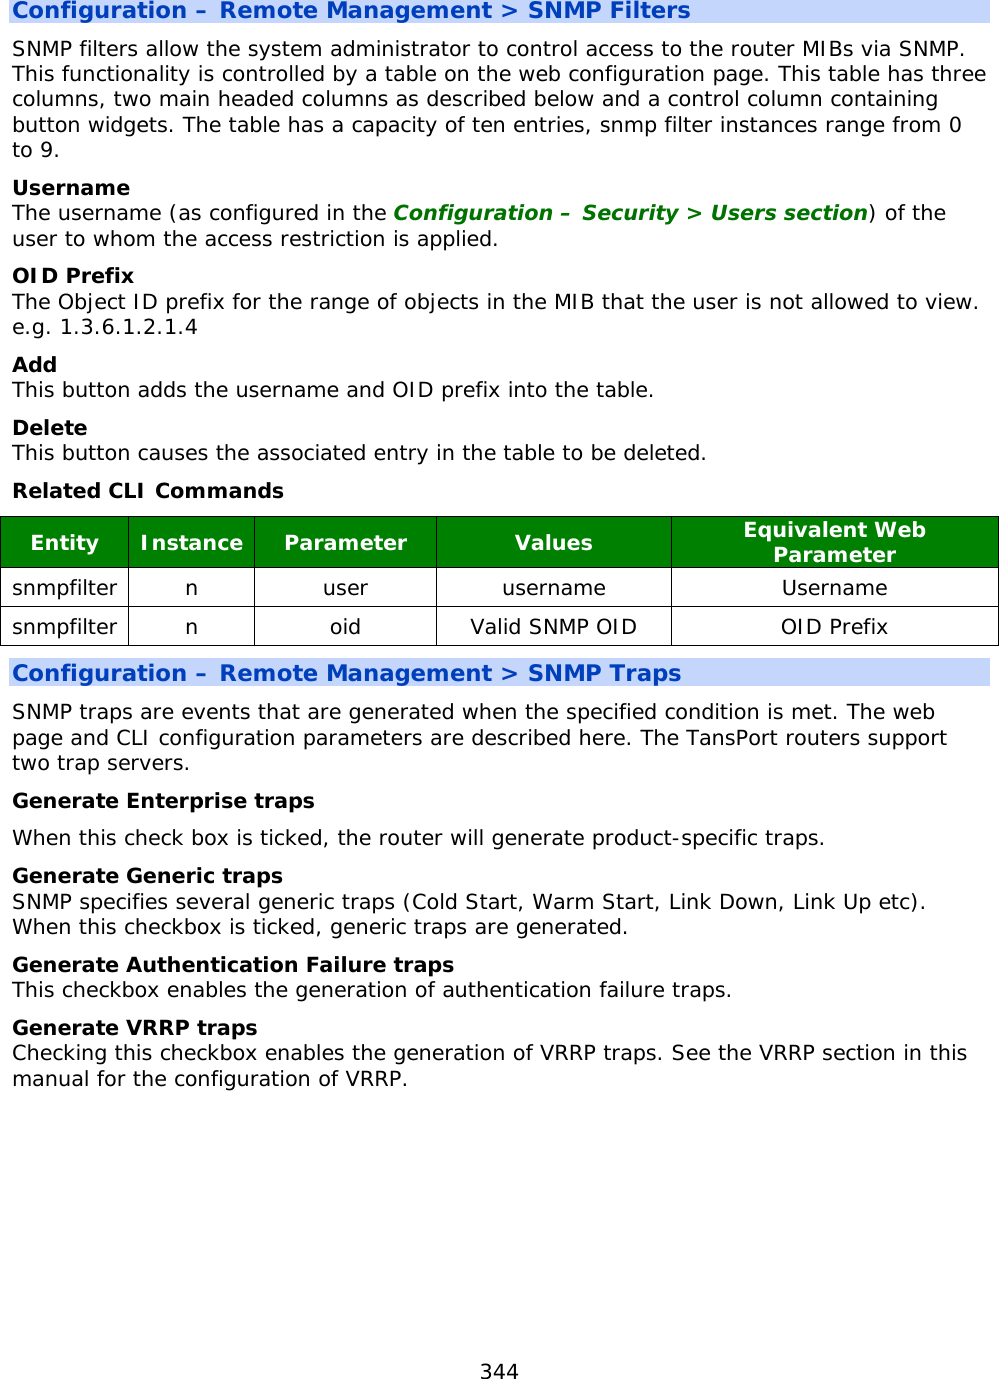 344  Configuration – Remote Management &gt; SNMP Filters SNMP filters allow the system administrator to control access to the router MIBs via SNMP. This functionality is controlled by a table on the web configuration page. This table has three columns, two main headed columns as described below and a control column containing button widgets. The table has a capacity of ten entries, snmp filter instances range from 0 to 9. Username The username (as configured in the Configuration – Security &gt; Users section) of the user to whom the access restriction is applied. OID Prefix The Object ID prefix for the range of objects in the MIB that the user is not allowed to view. e.g. 1.3.6.1.2.1.4 Add This button adds the username and OID prefix into the table. Delete This button causes the associated entry in the table to be deleted. Related CLI Commands Entity  Instance  Parameter Values Equivalent Web Parameter snmpfilter  n  user username Username snmpfilter  n  oid Valid SNMP OID OID Prefix Configuration – Remote Management &gt; SNMP Traps SNMP traps are events that are generated when the specified condition is met. The web page and CLI configuration parameters are described here. The TansPort routers support two trap servers. Generate Enterprise traps When this check box is ticked, the router will generate product-specific traps. Generate Generic traps SNMP specifies several generic traps (Cold Start, Warm Start, Link Down, Link Up etc). When this checkbox is ticked, generic traps are generated. Generate Authentication Failure traps This checkbox enables the generation of authentication failure traps. Generate VRRP traps Checking this checkbox enables the generation of VRRP traps. See the VRRP section in this manual for the configuration of VRRP.    